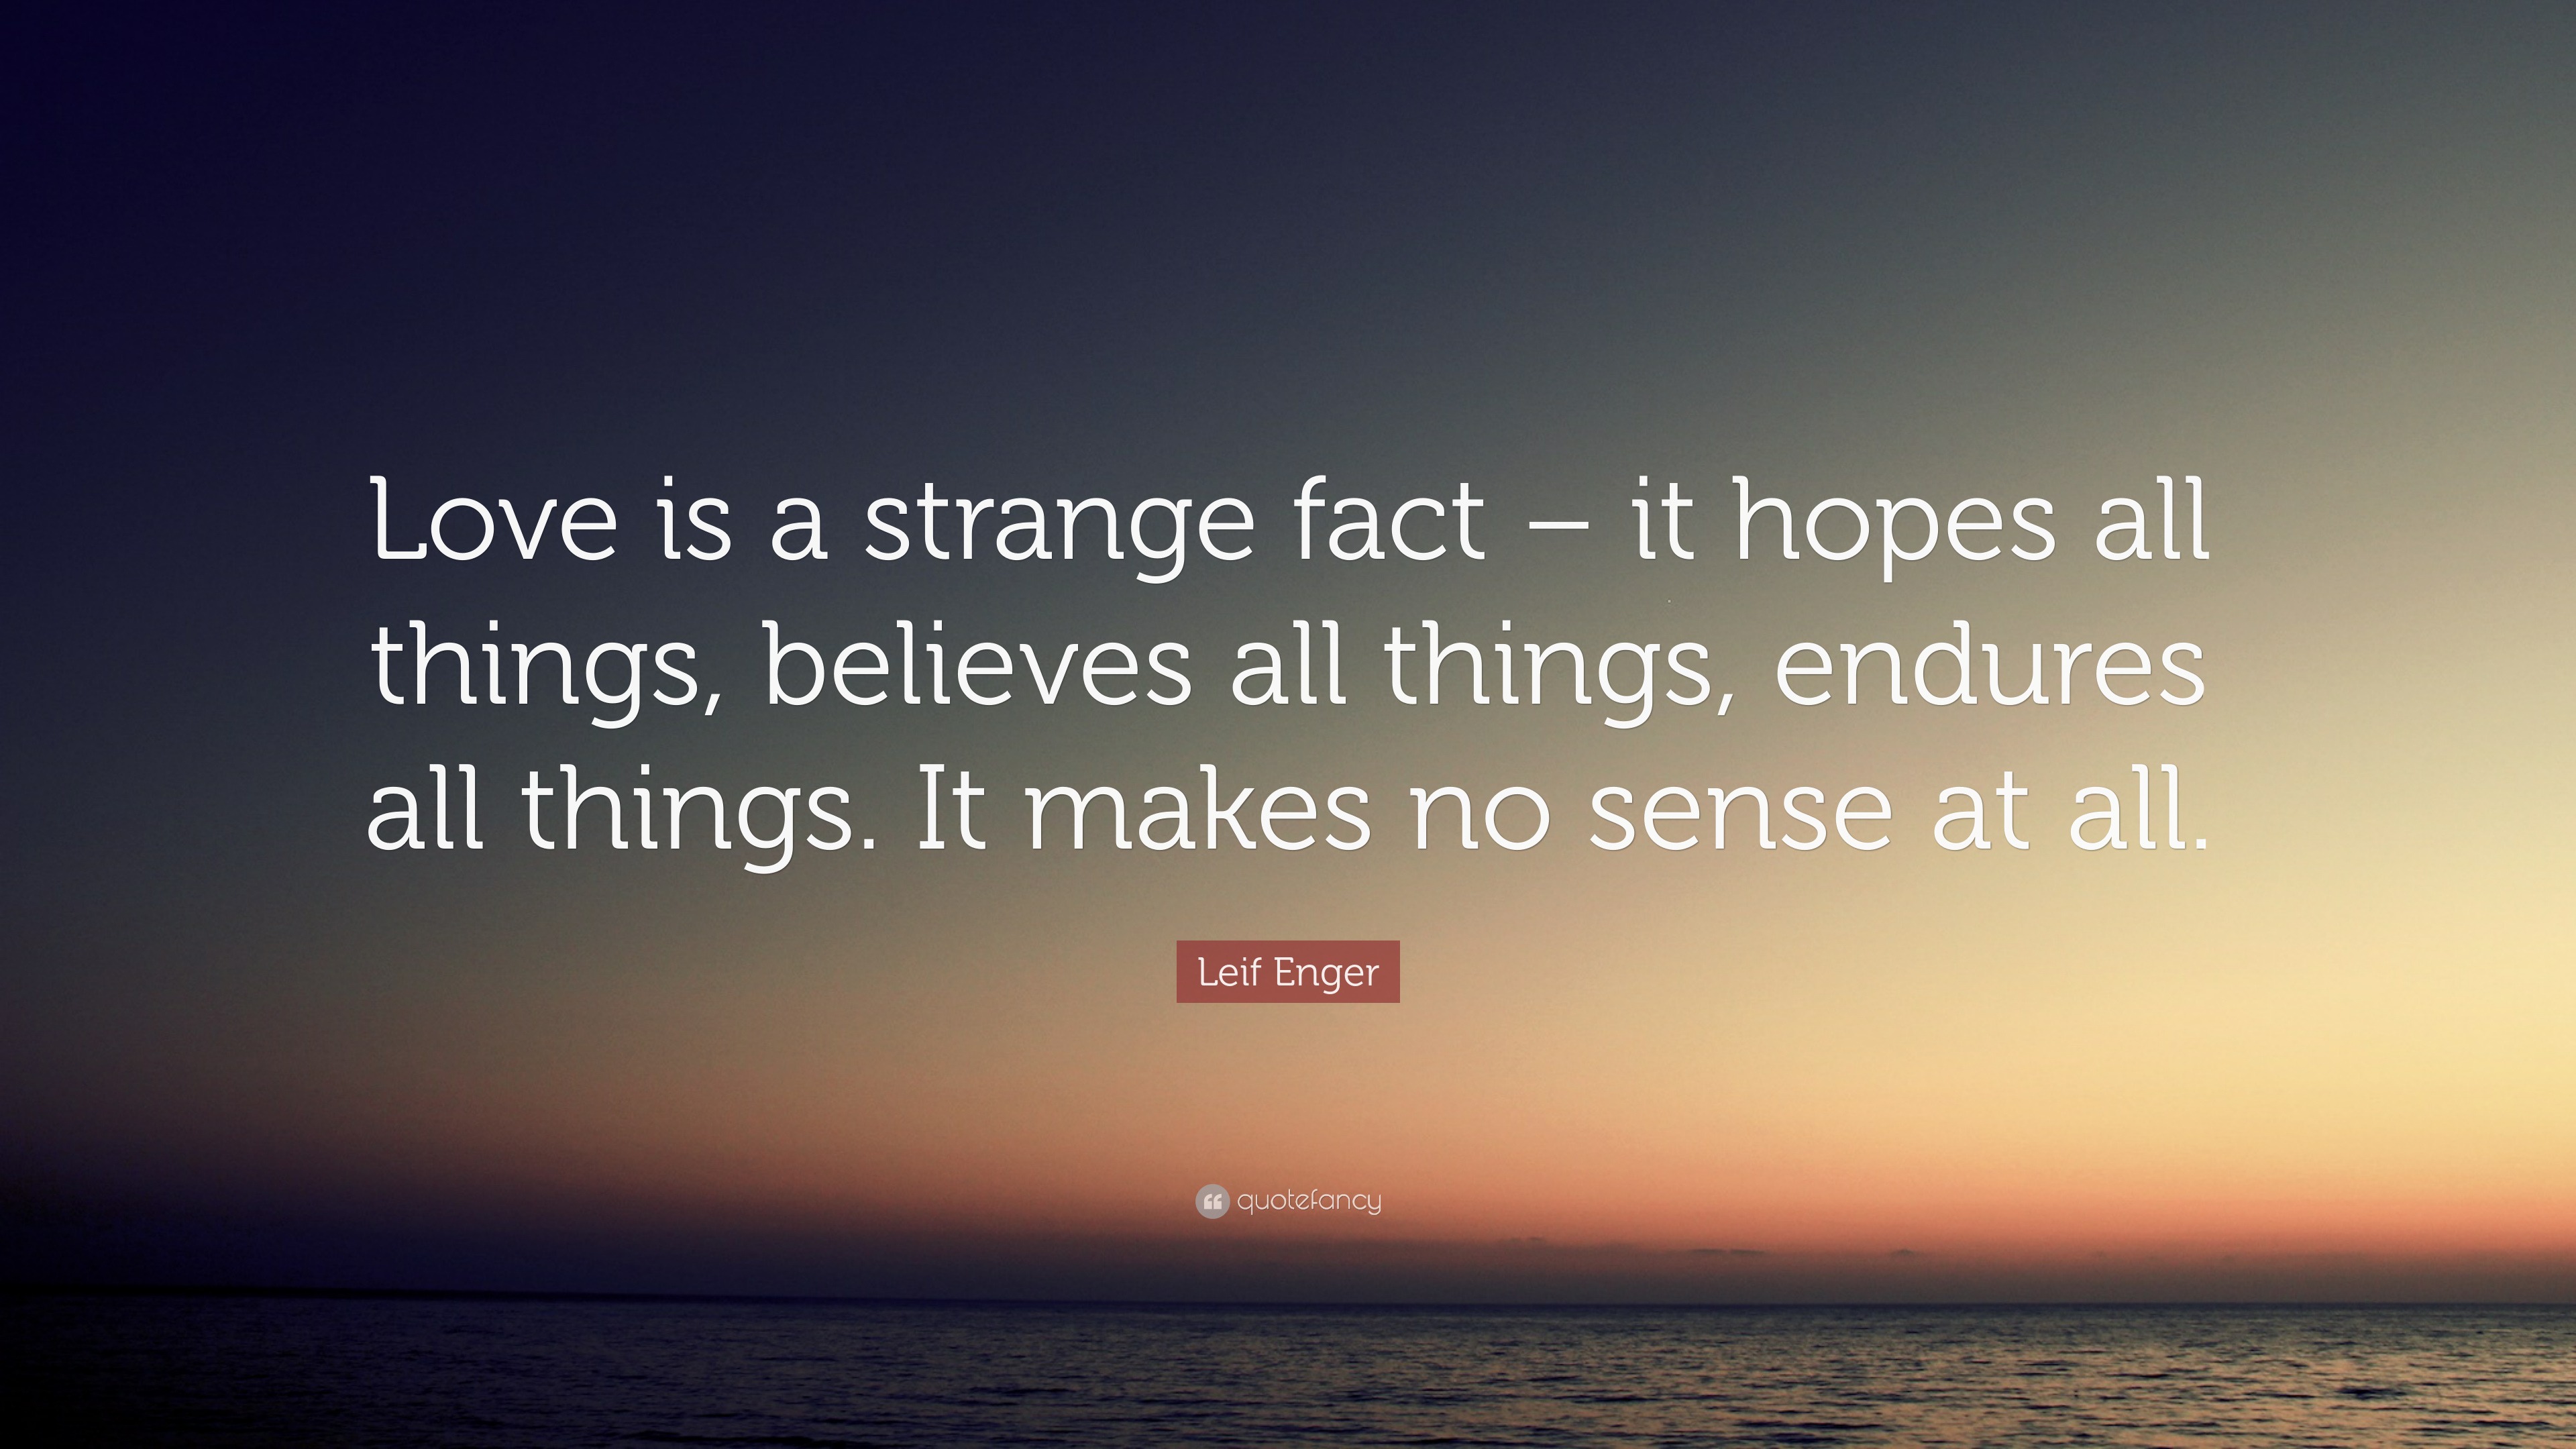 Leif Enger Quote: “Love is a strange fact – it hopes all things ...